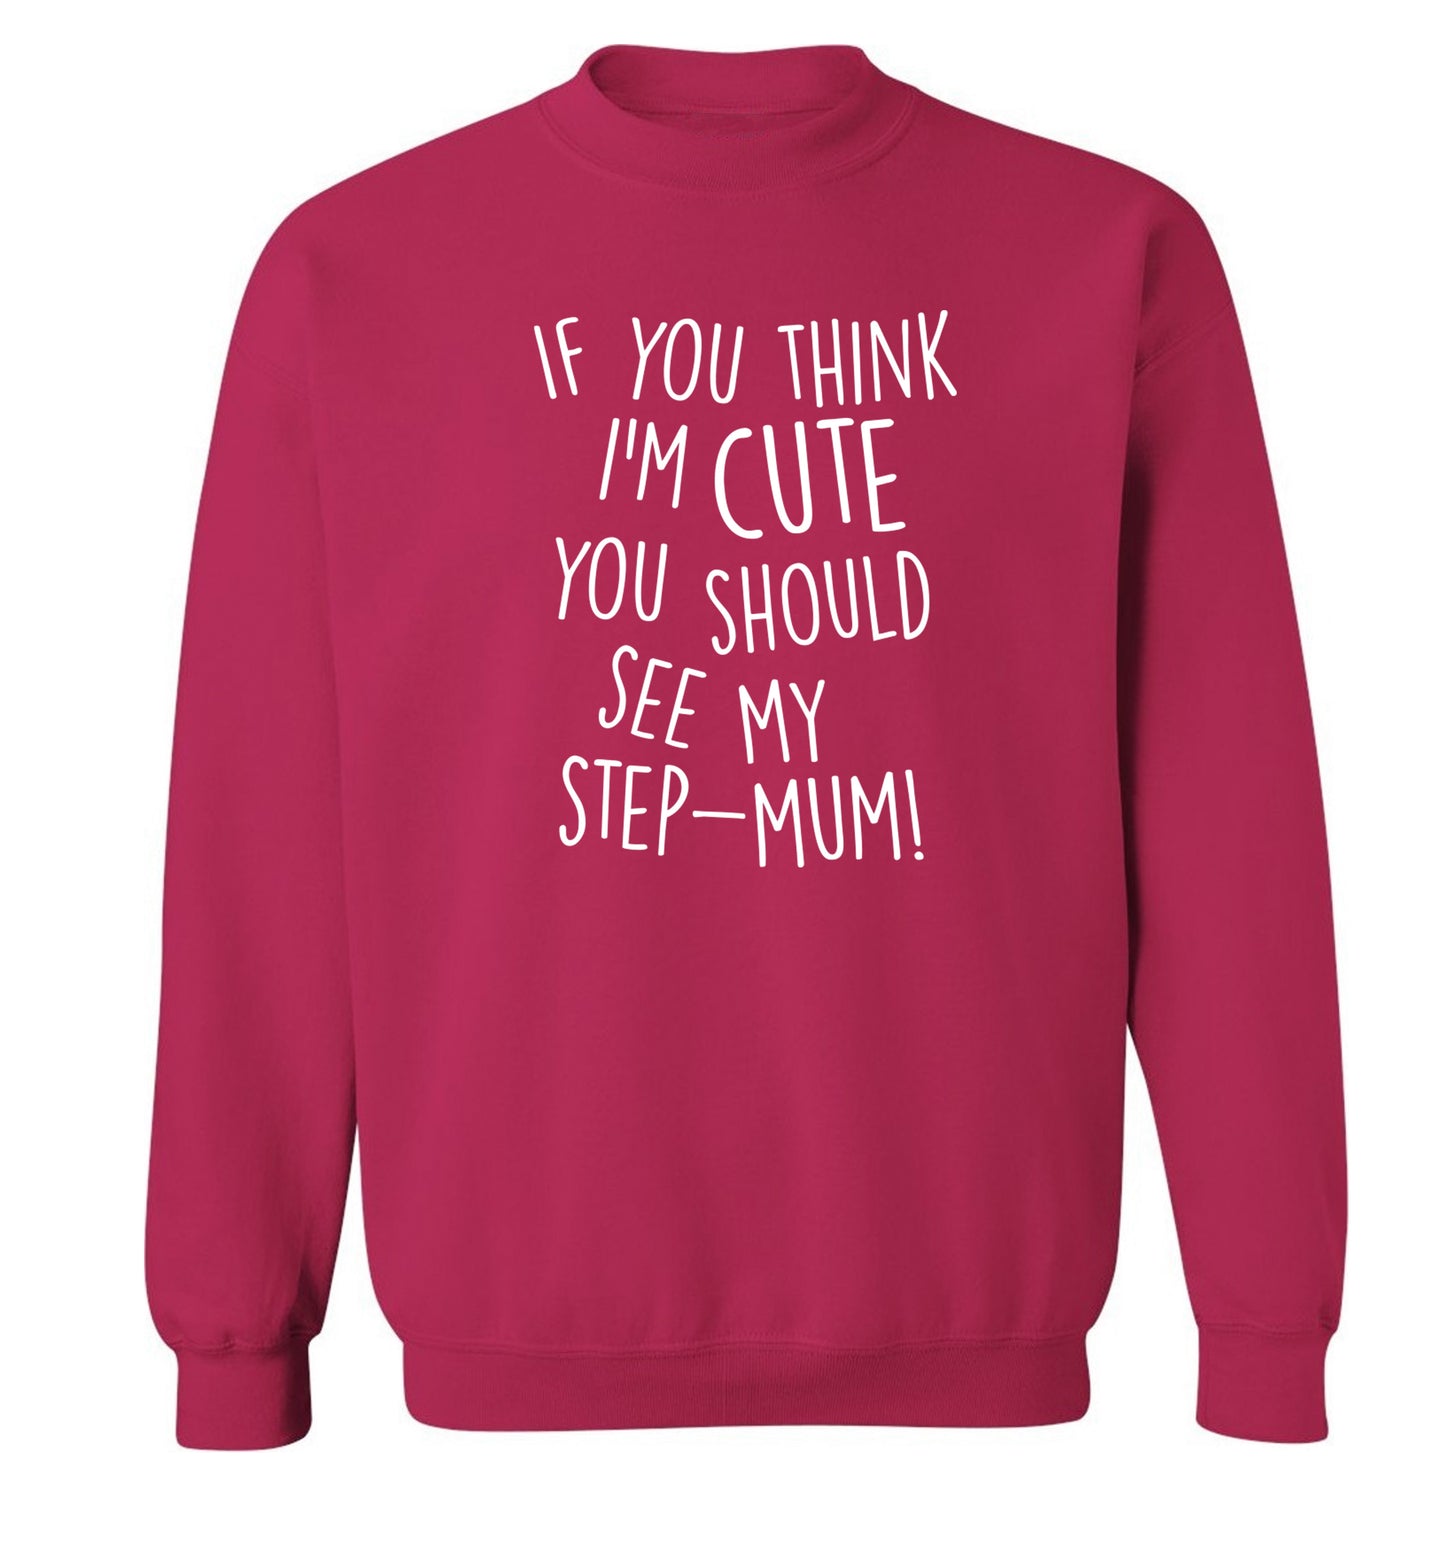 If you think I'm cute you should see my step-mum Adult's unisex pink Sweater 2XL